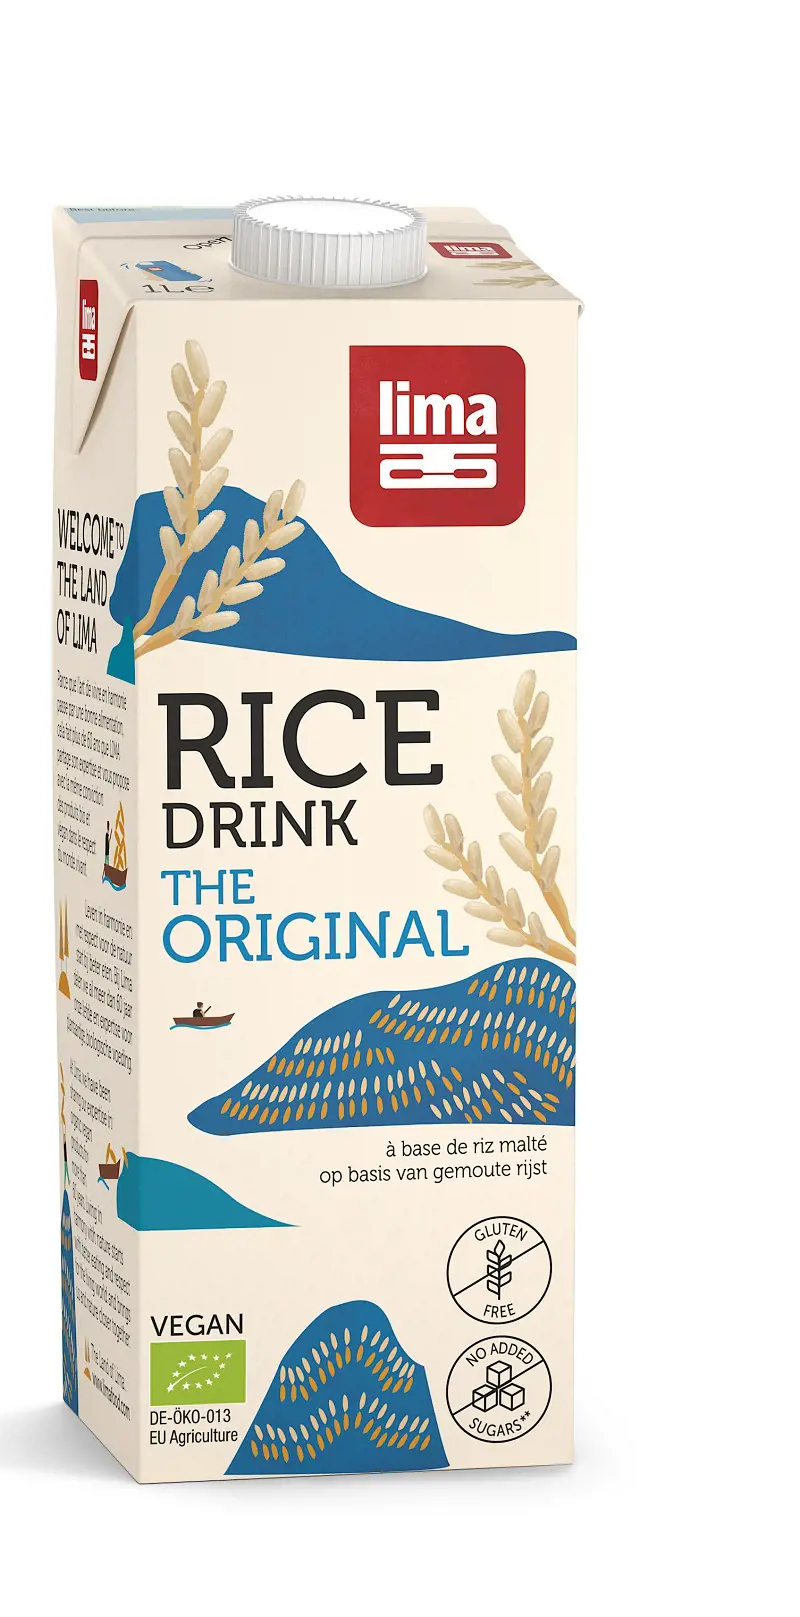 The tasty rice drinks with its refreshing flavour with vanilla is a favourite vegetable drink